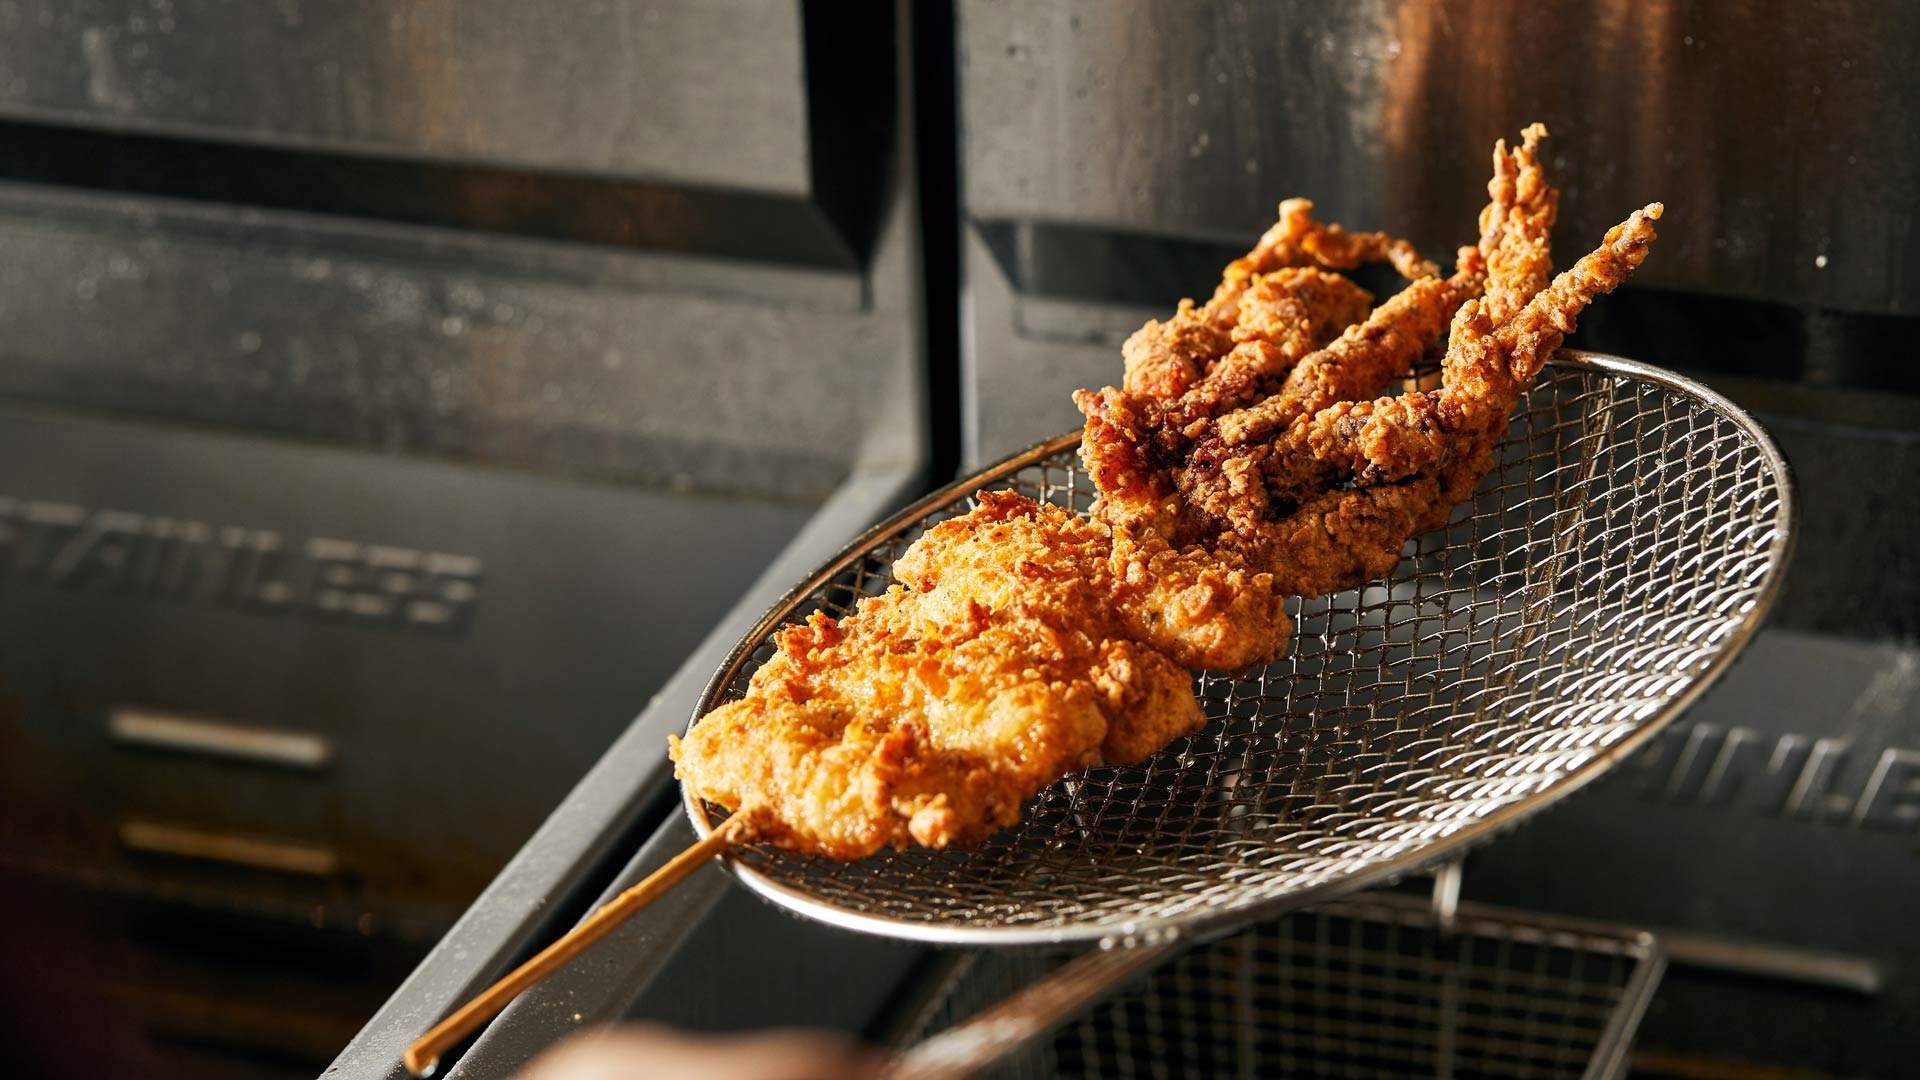 IKA8 Is Footscray's New Southeast Asian Street Food Shop Serving Up 'Giant' Fried Squid on a Stick